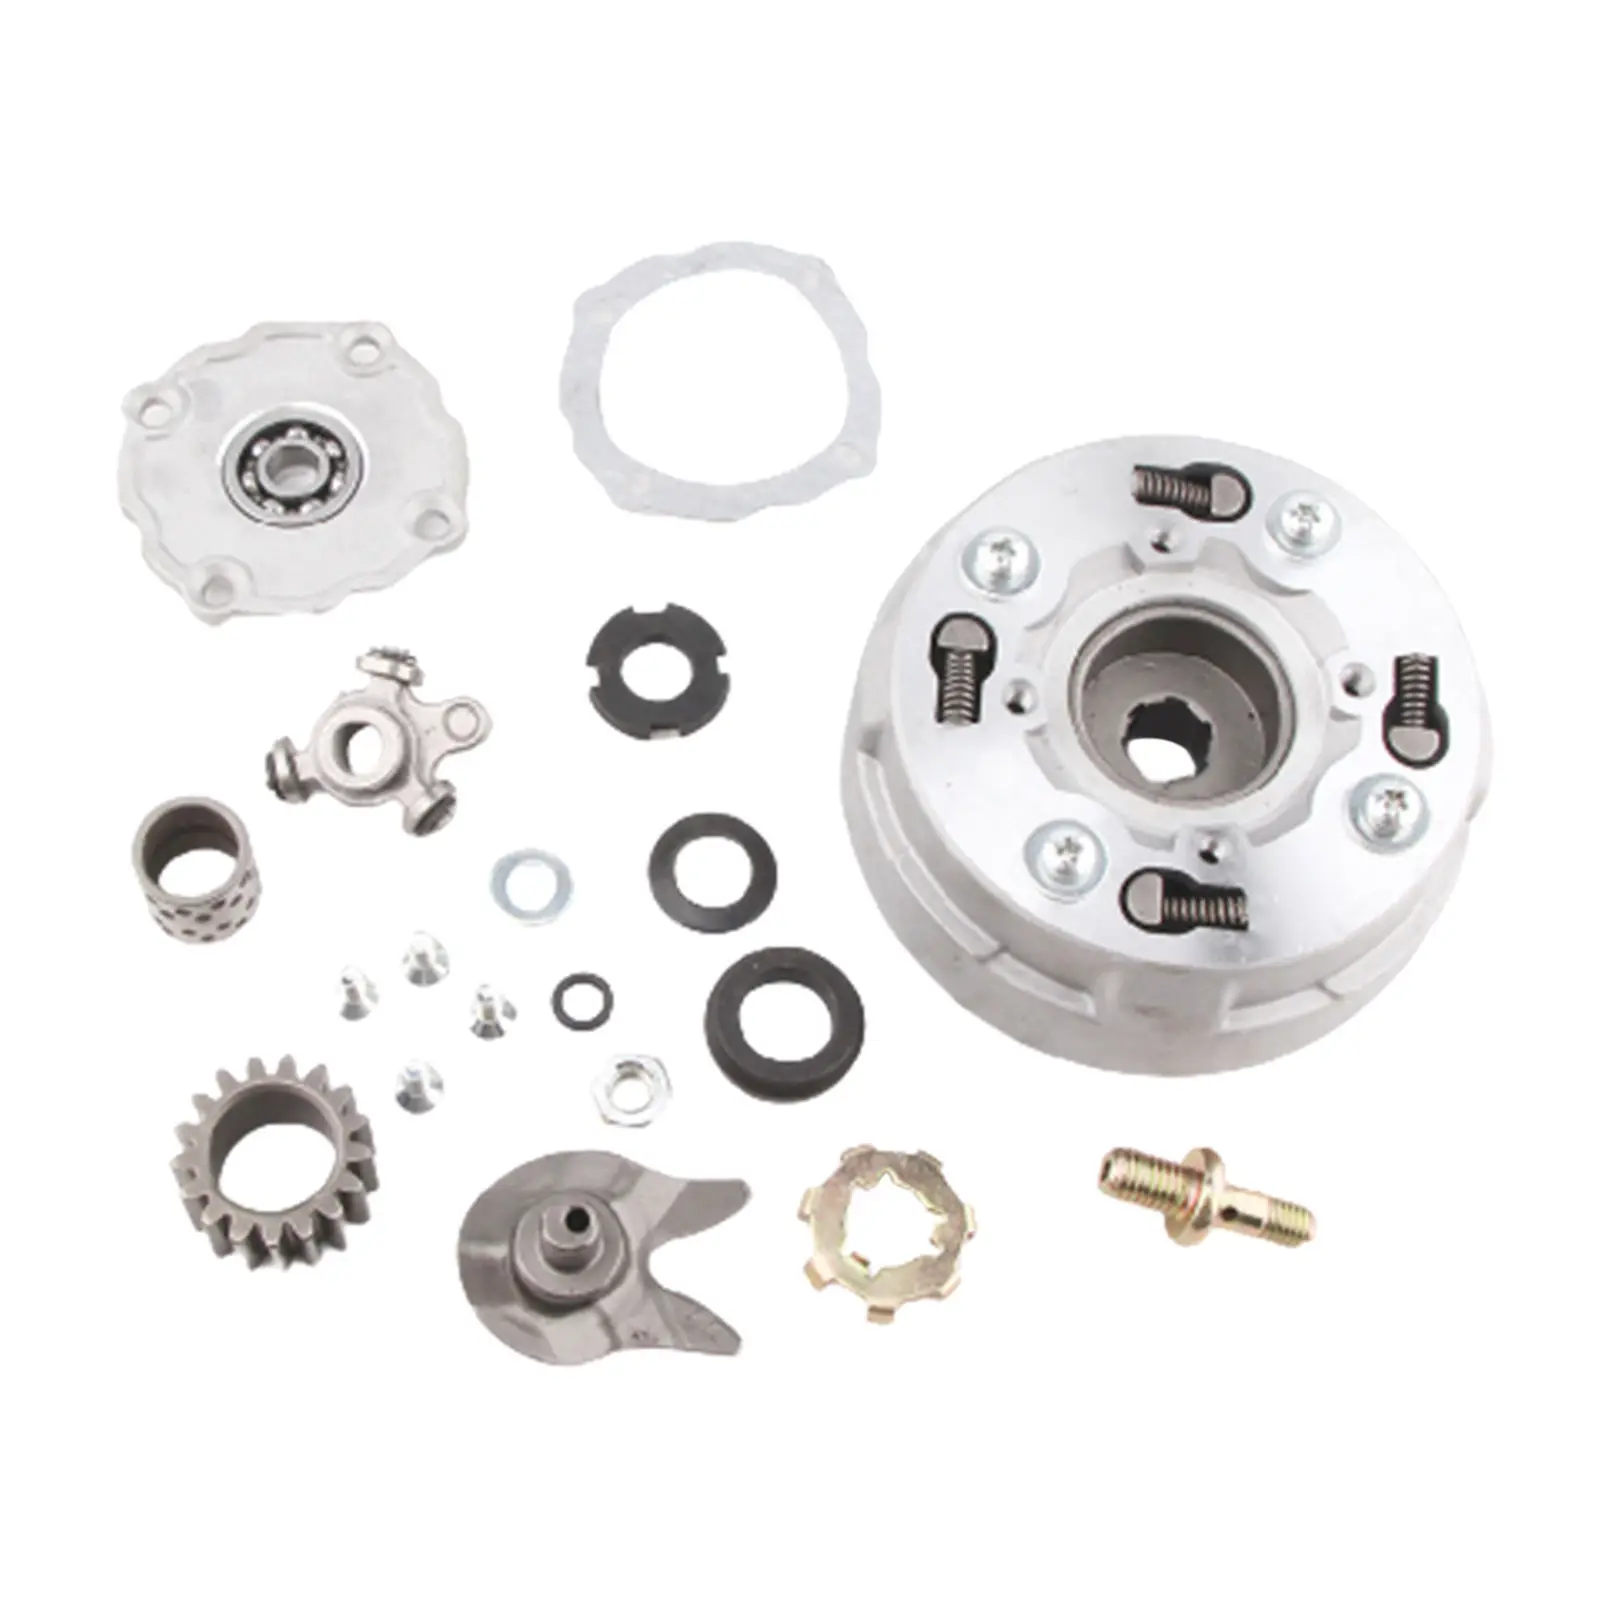 Semi Automatic Clutch Assembly for 90cc ATV, Scooters, Quad Dirt Bikes Parts